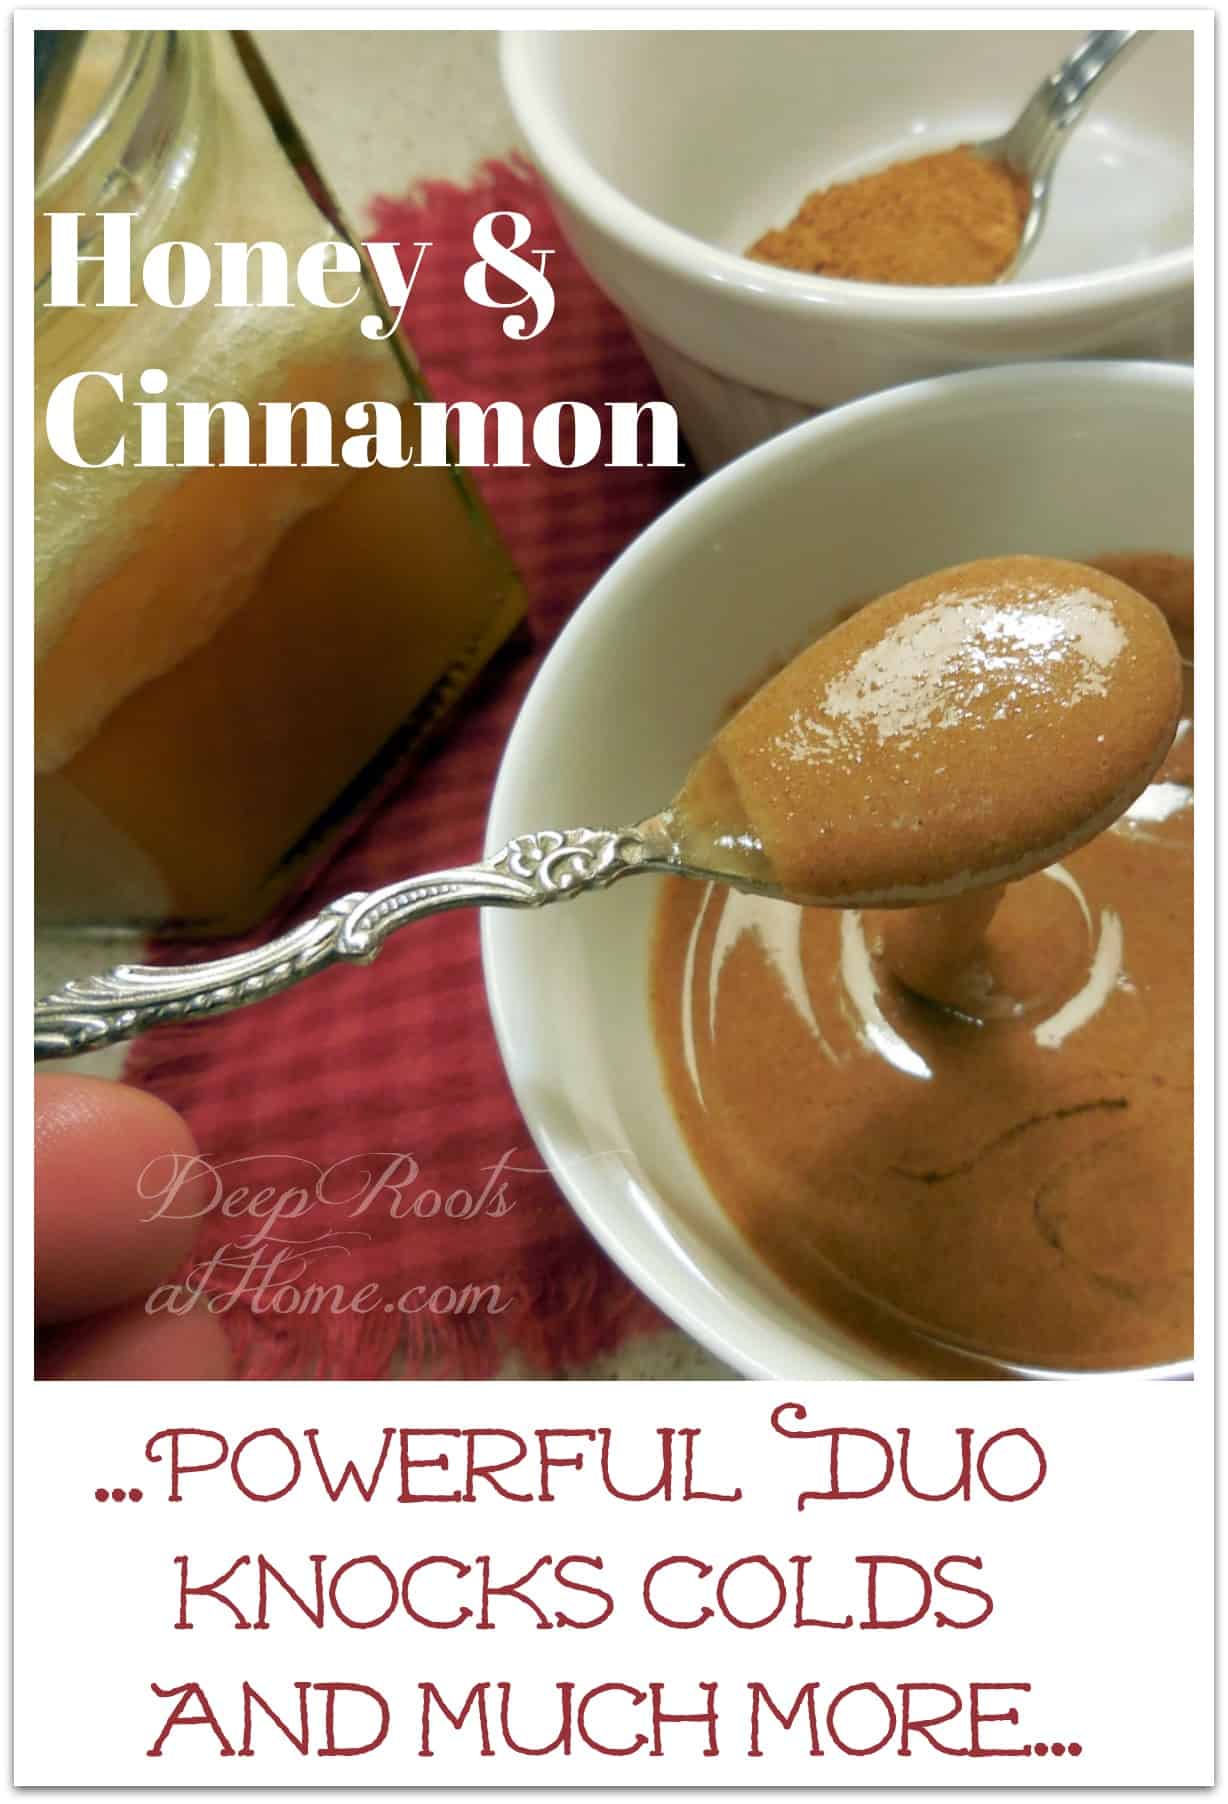 Honey and Cinnamon ~Powerful Duo Knocks Colds and Diabetes, knock out a cold, beat the flu, influenza, sore throat, chest congestion, runny nose, upset stomach, indigestion, reduce blood pressure, good for bladder infections, fights infections, relieves arthritis pain, prevents gas, coffee is dehydrating, drink more water, wound cleansing, builds immune system, Redmond's Real, anti-bacterial, anti-viral, anti-fungal, Celtic, or Himalayan, minerals, NaturalNews.com, No-Side-Effect Cough Remedy, no chemicals, no additives, free from colors or dyes, health benefits, anti-inflammatory, stabilizes blood sugar levels, LiveStrong.com, Snopes, treat disease, folk medicine, natural remedies, help for bladder infections, diabetes, Type 1 and 2, raw, local, healthy lifestyle, Encyclopedia of Healing Foods, cure for colds, old-fashioned, home remedy, DIY, medicine cabinet, herbal remedies,